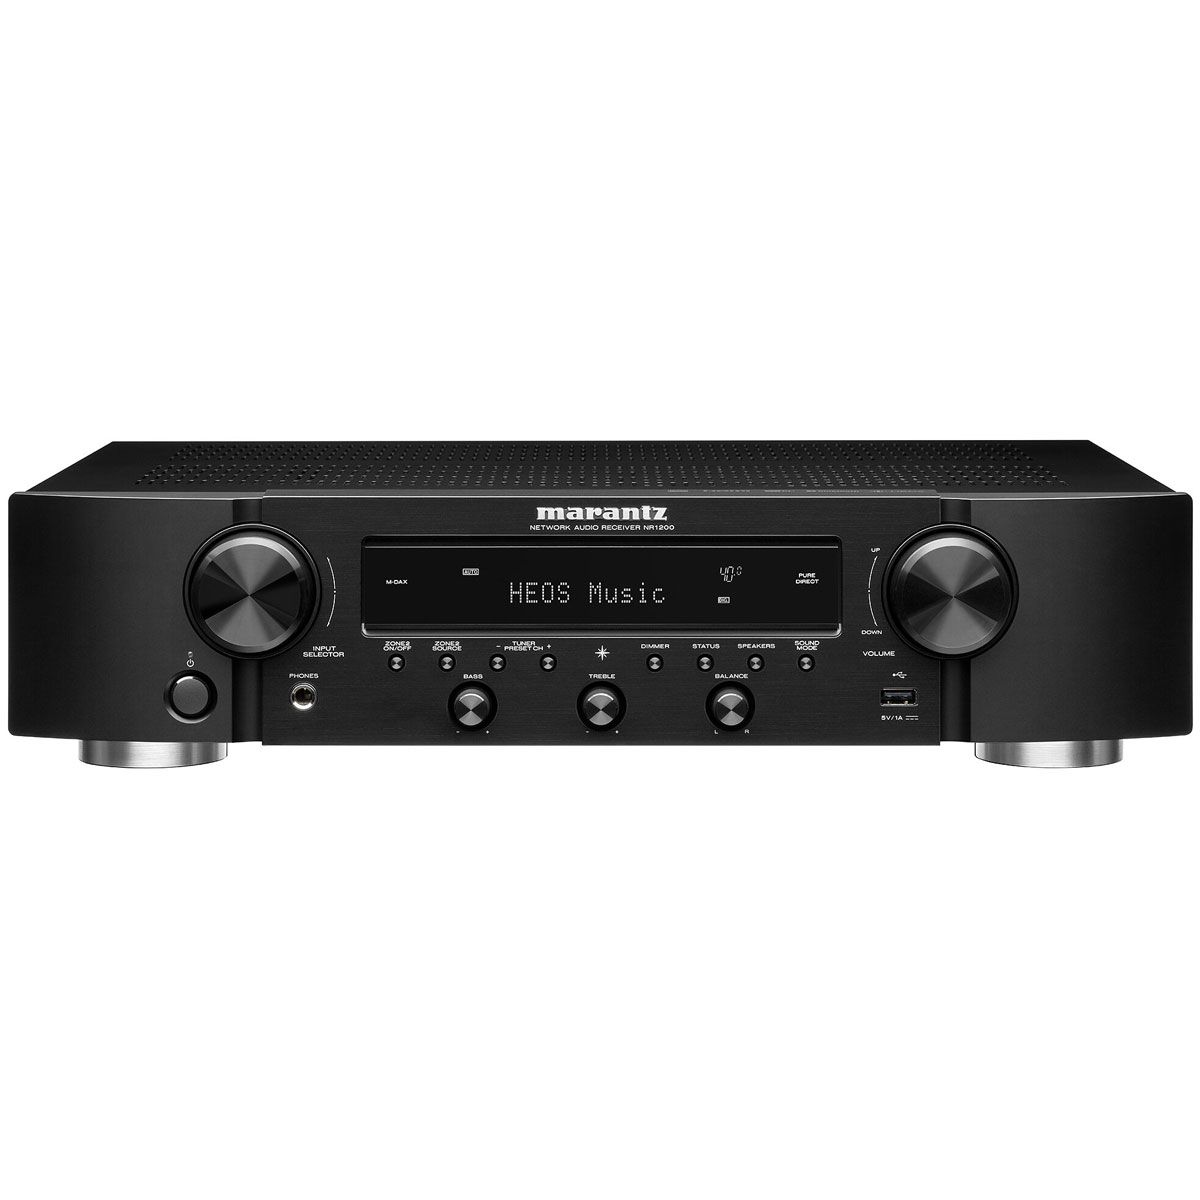 Marantz NR1200 2 Channel Slim Stereo Receiver - front view